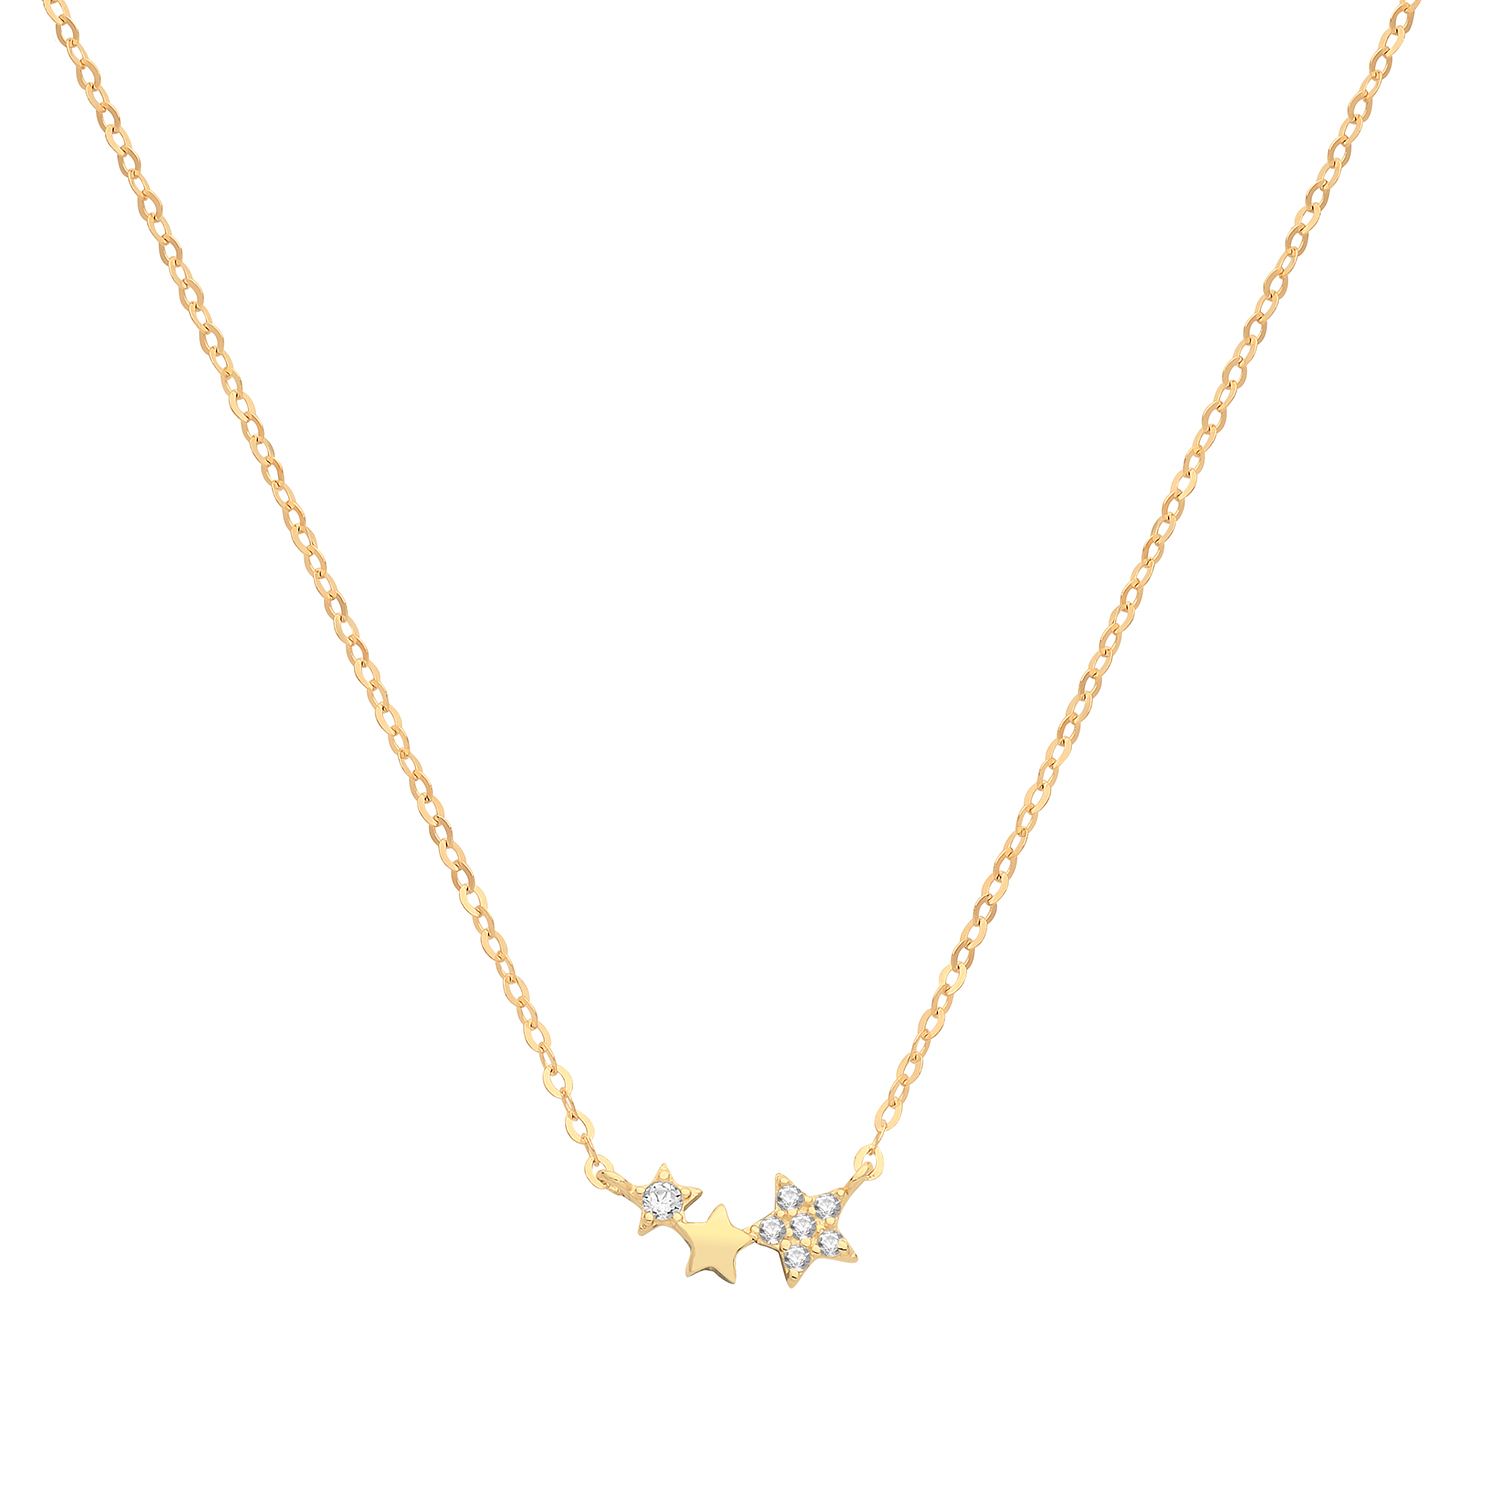 9ct Gold Triple Star Cz Necklace - Northumberland Goldsmiths